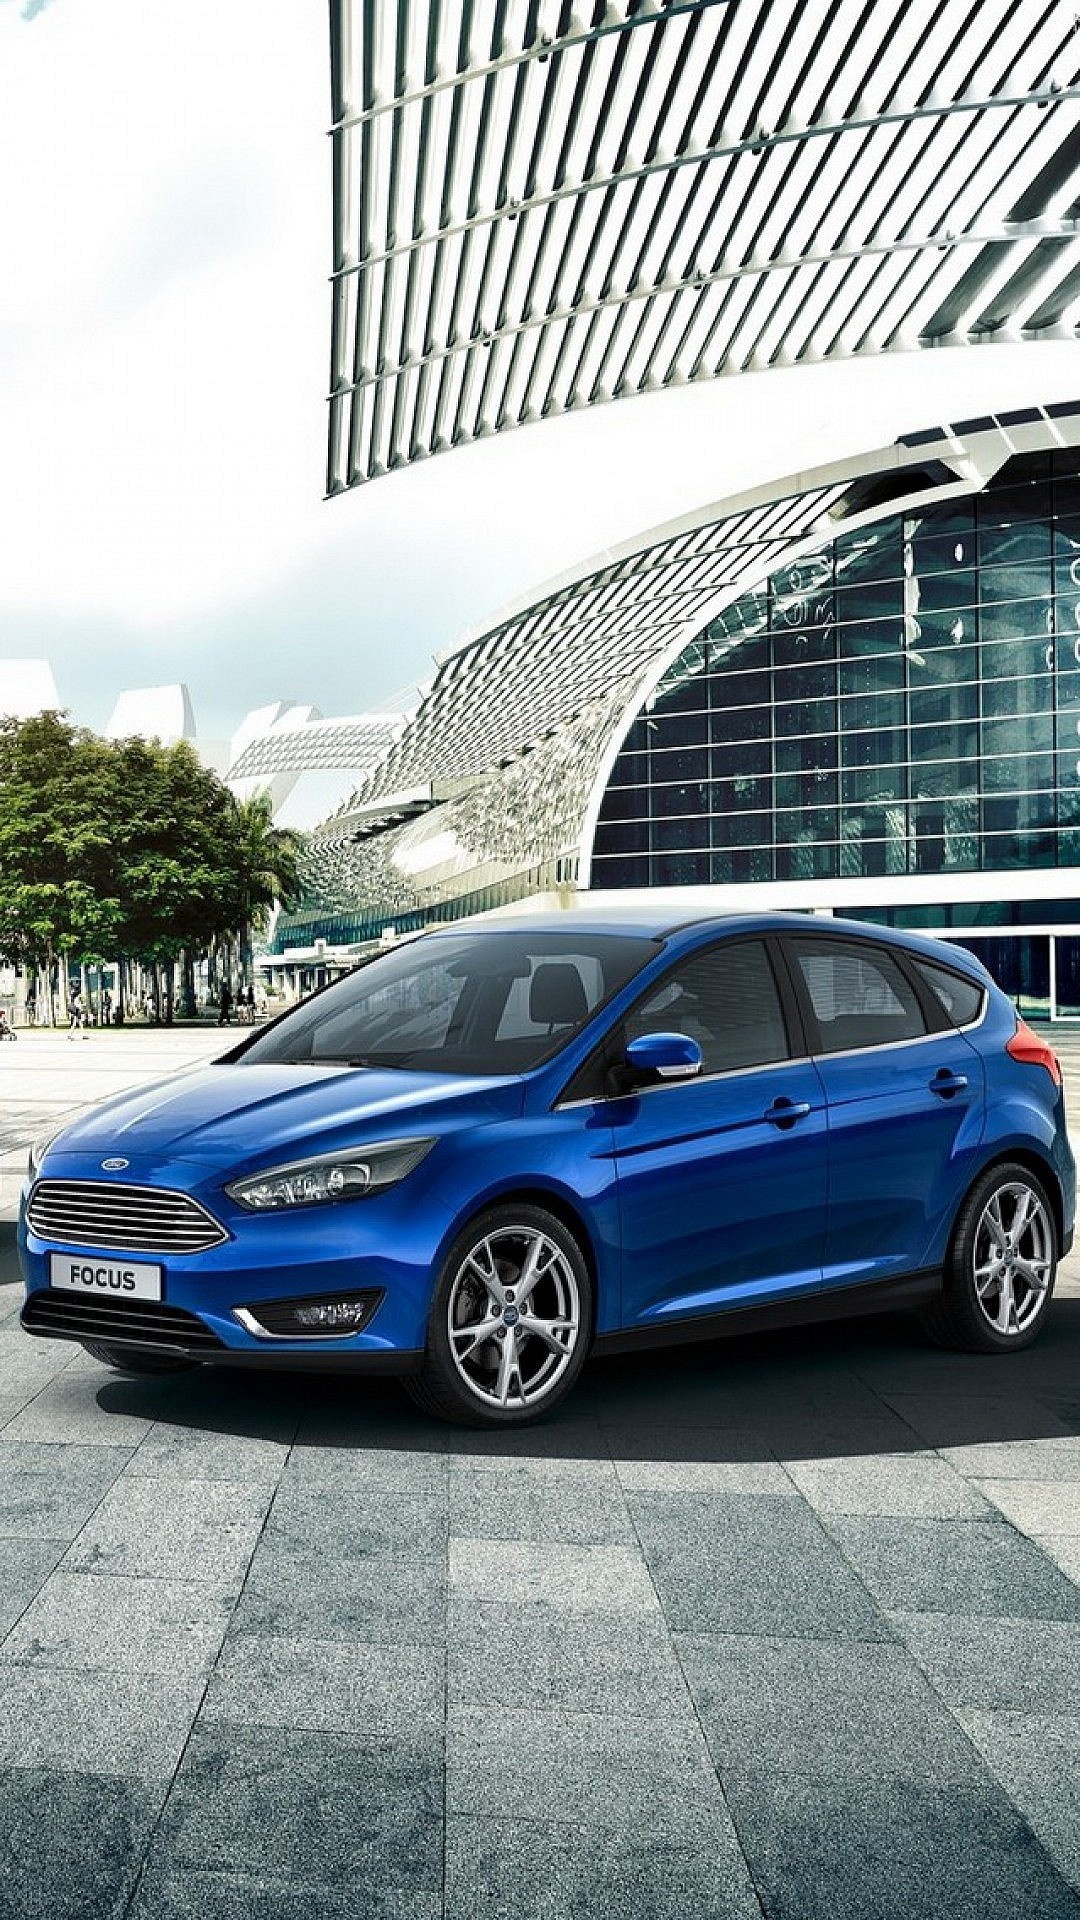 Ford Focus: Only the ST-Line and Titanium trims were introduced in China. 1080x1920 Full HD Wallpaper.